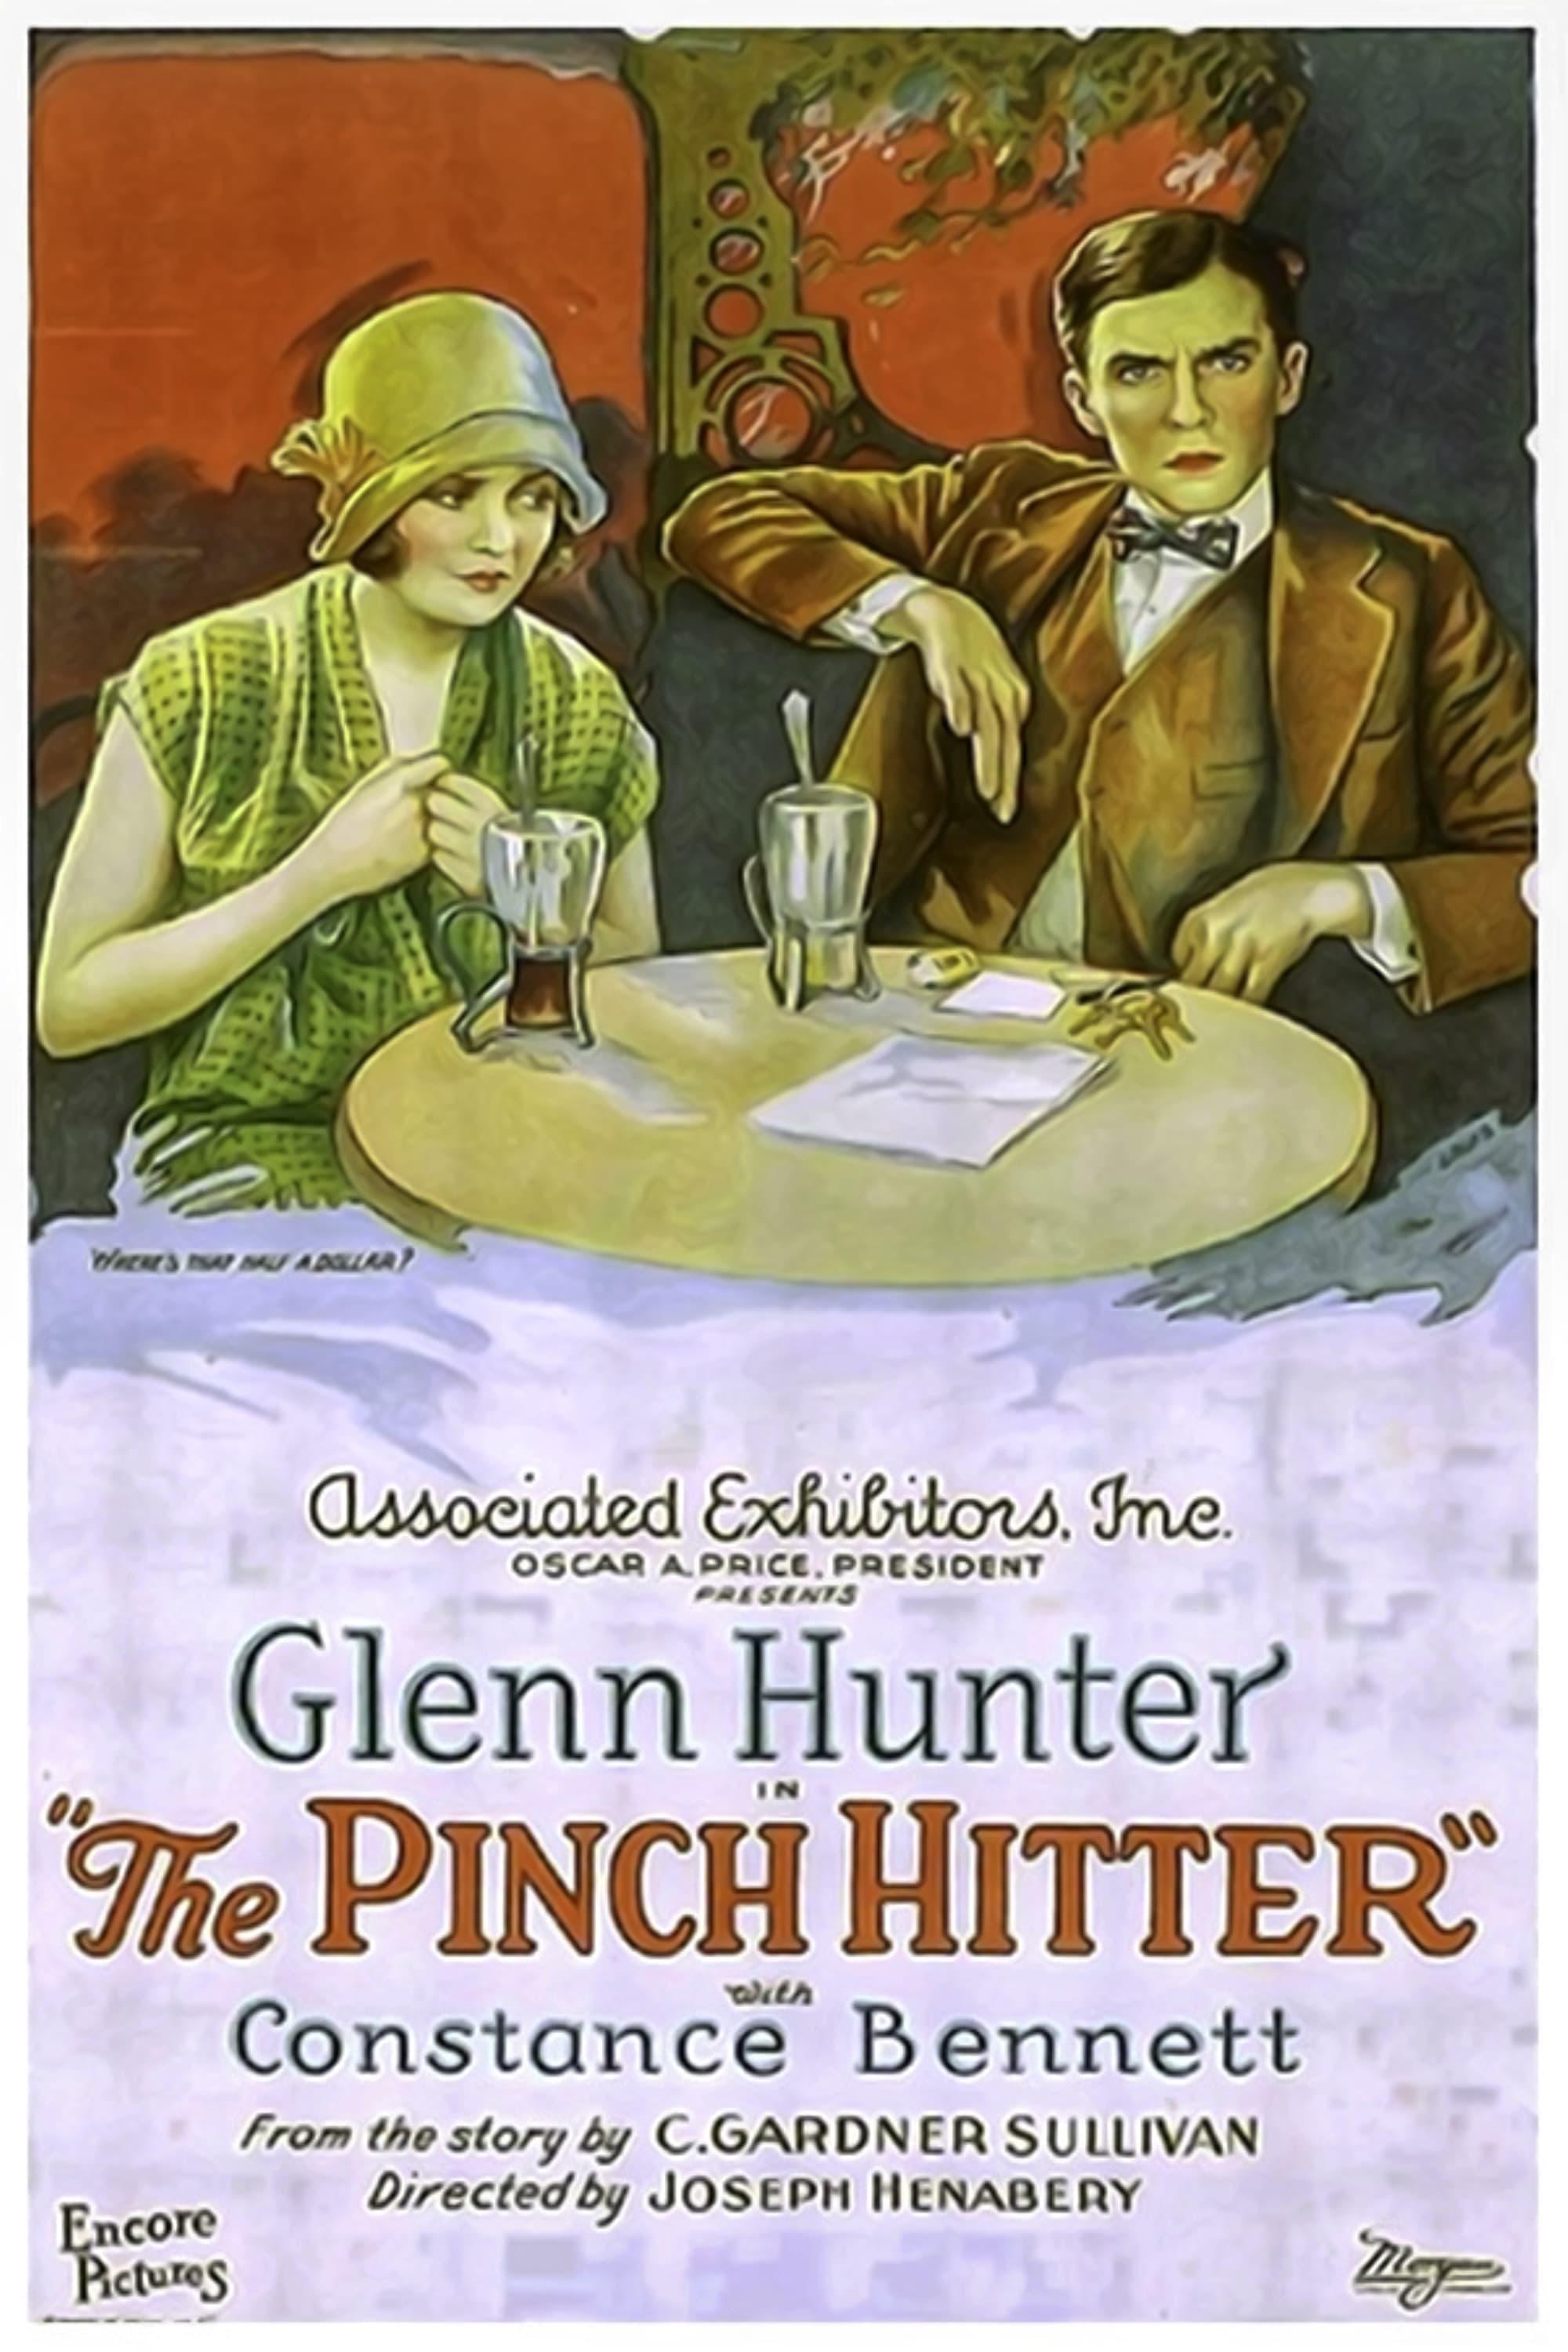 The Pinch Hitter poster